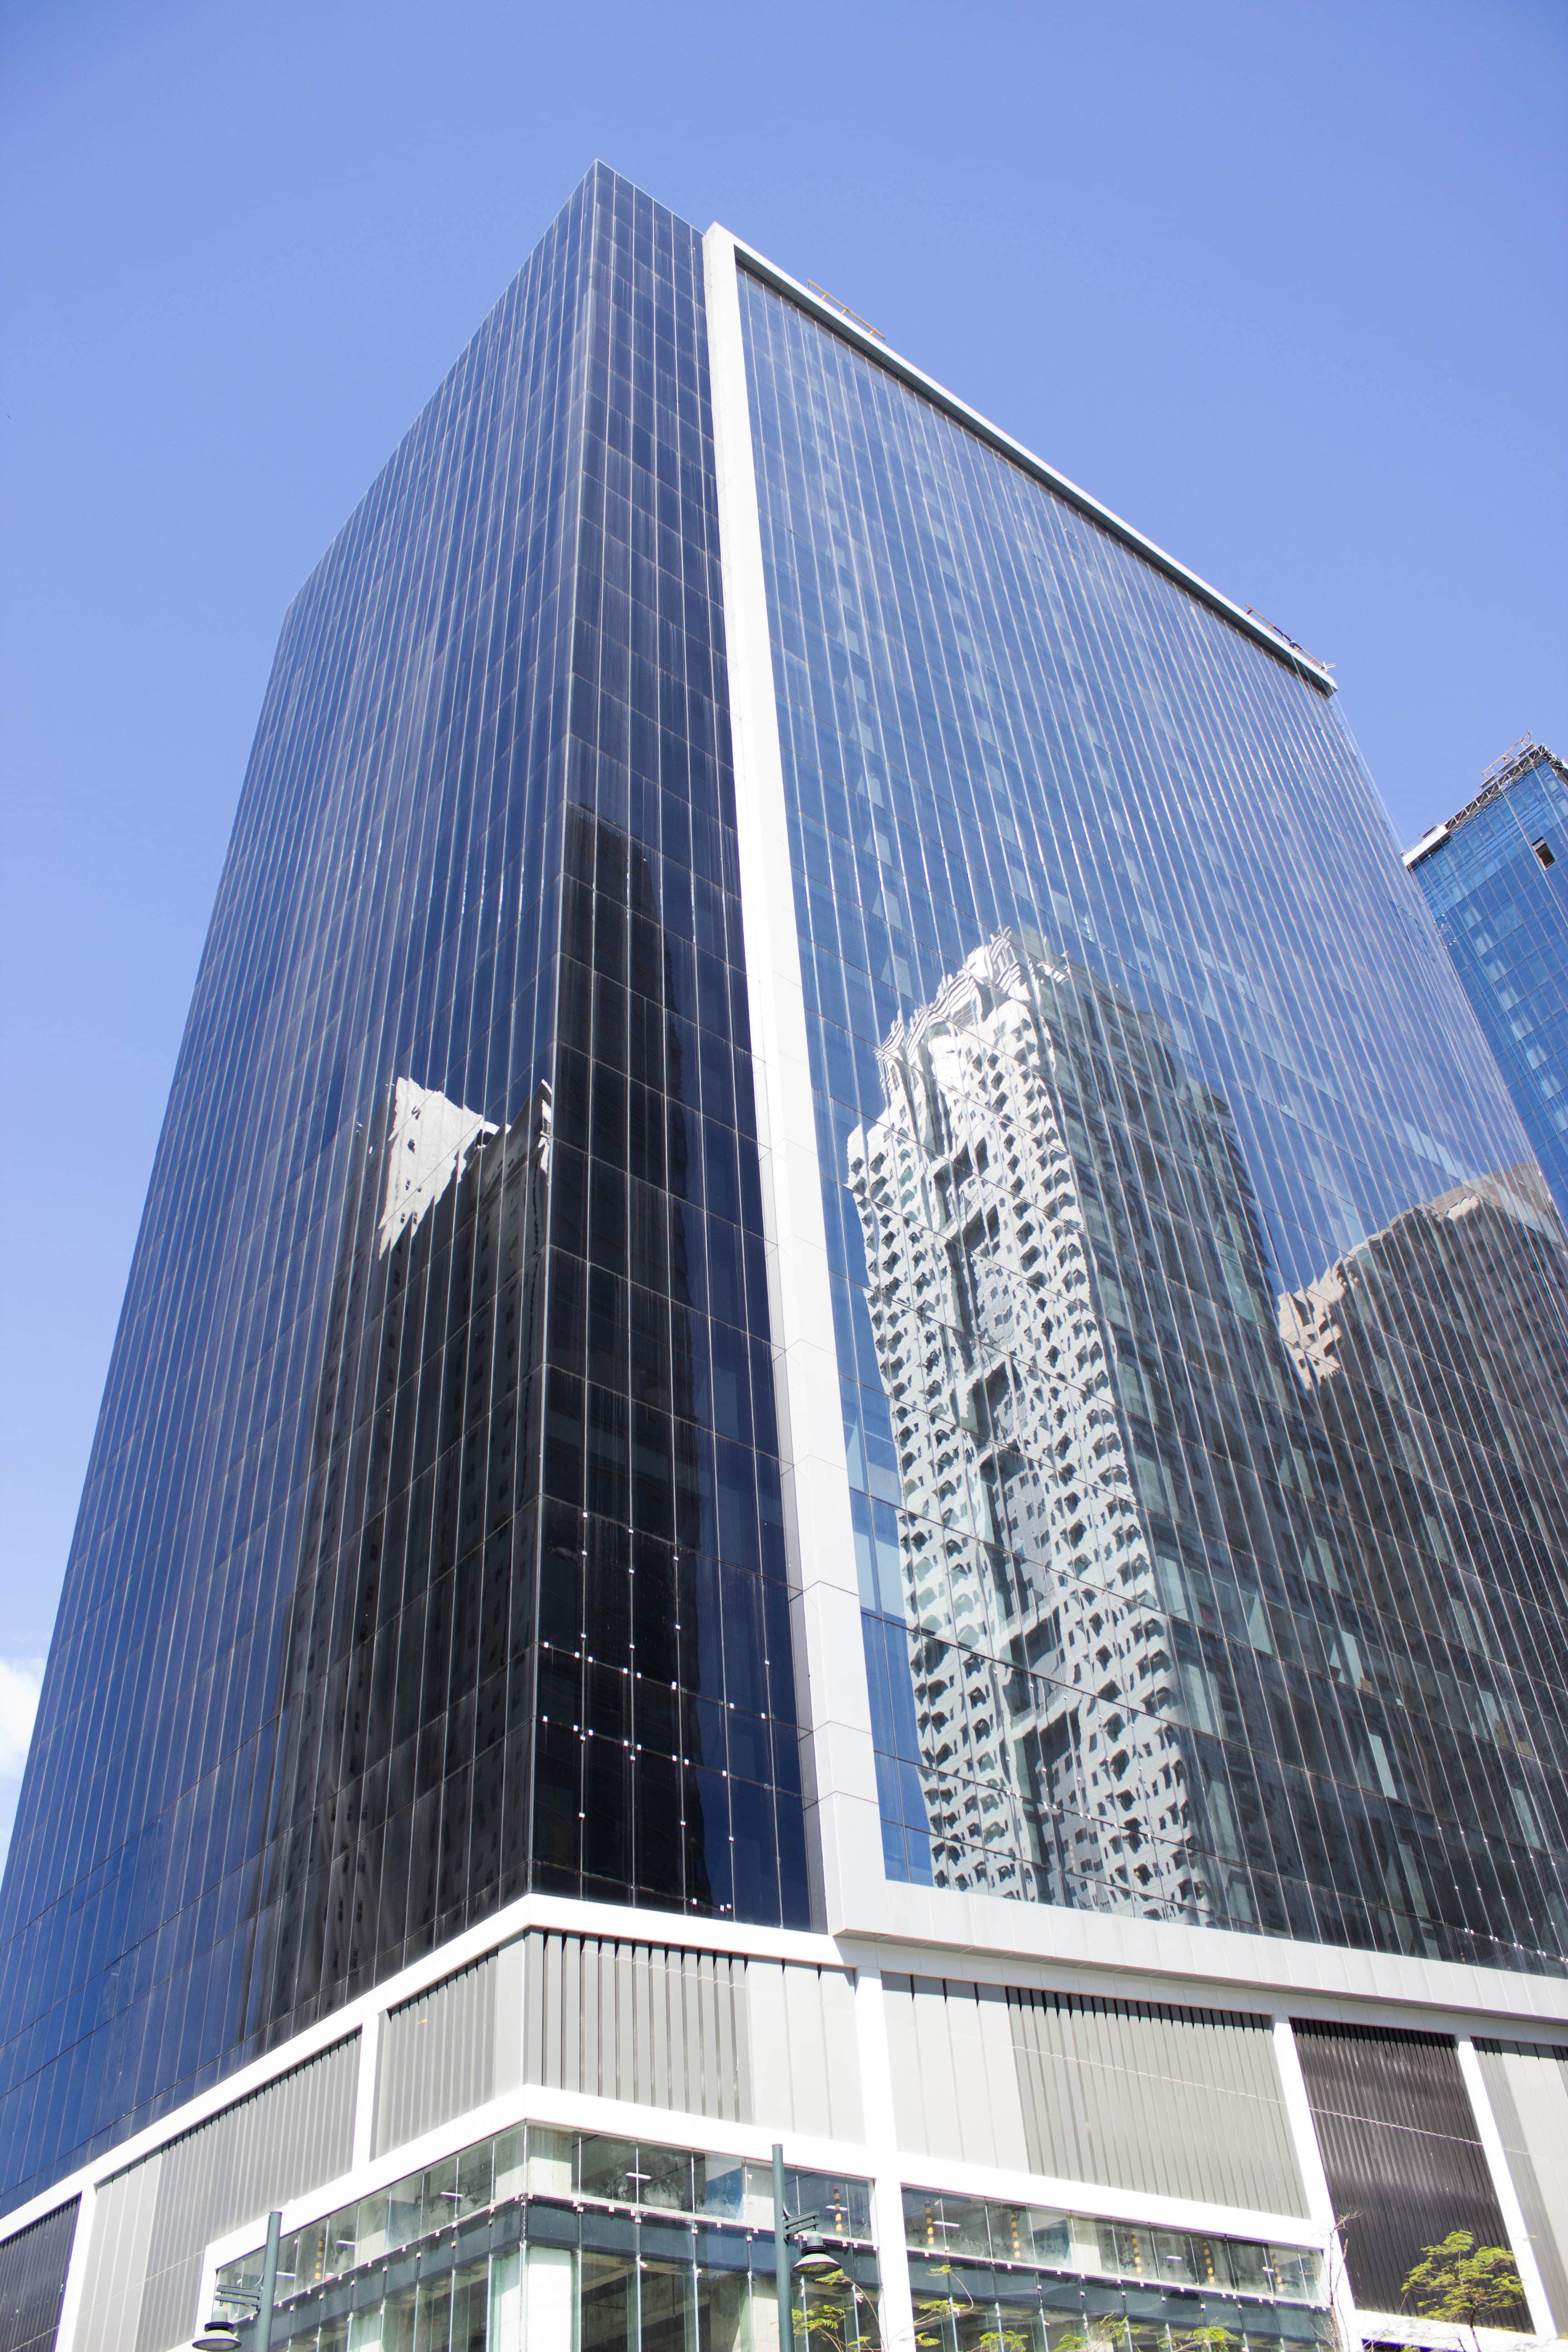 165 sqm Long-Term Office Space for Lease in High Street South, BGC